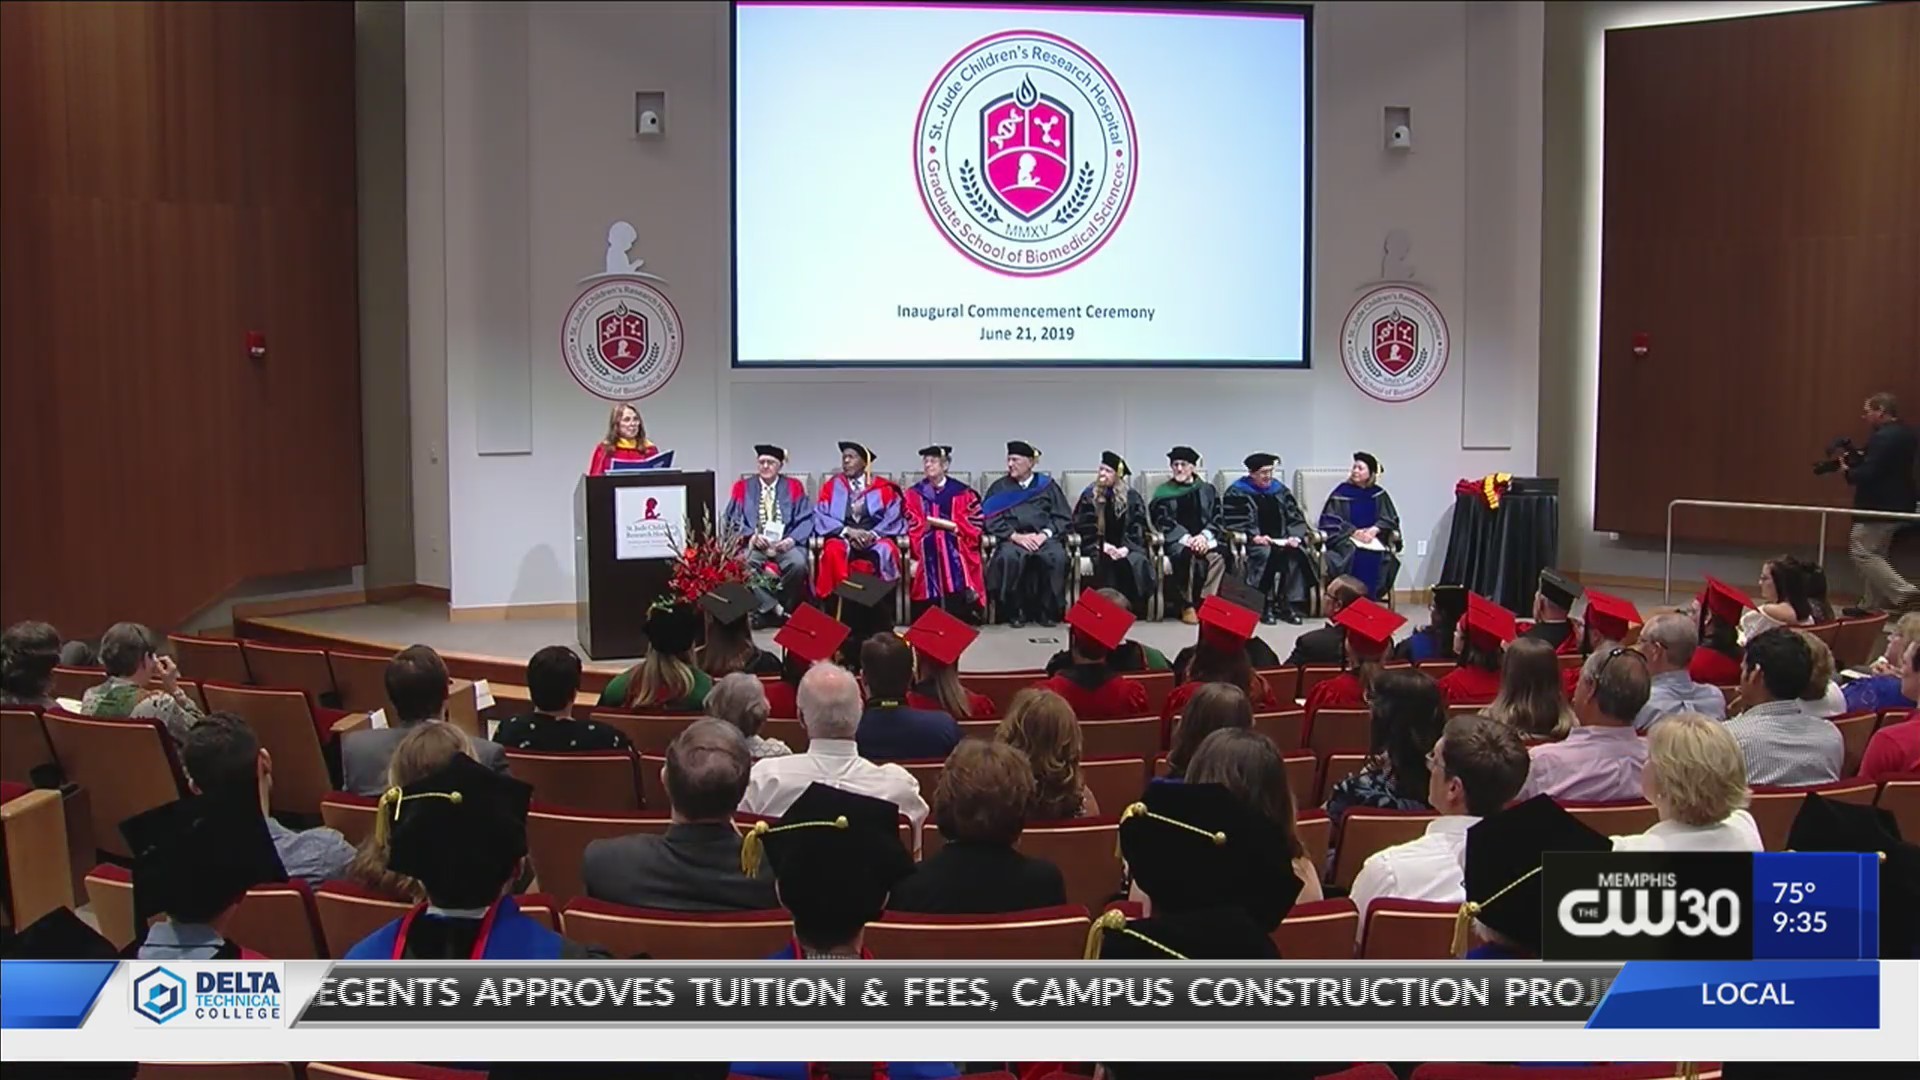 St. Jude Graduate School of Biomedical Sciences awards Masters degrees to inaugural class